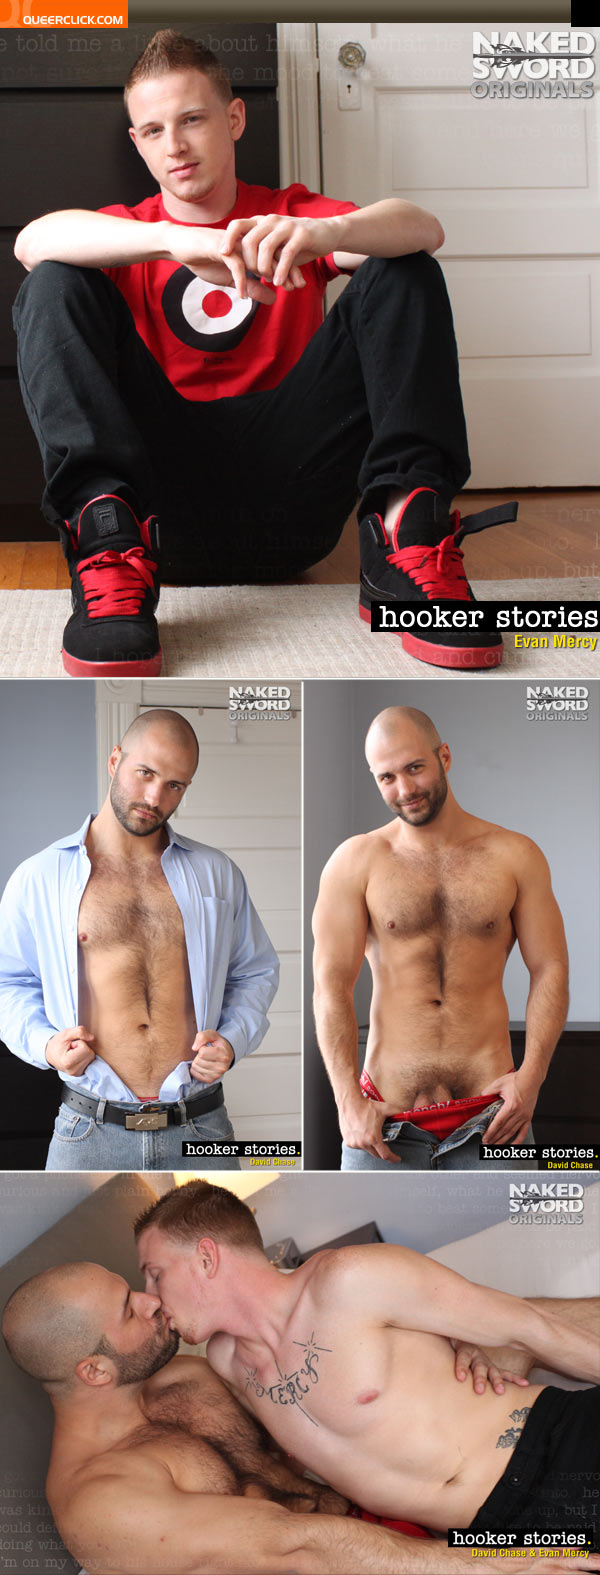 Naked Sword Hooker Stories Episode 4 - Evan Mercy and David Chase